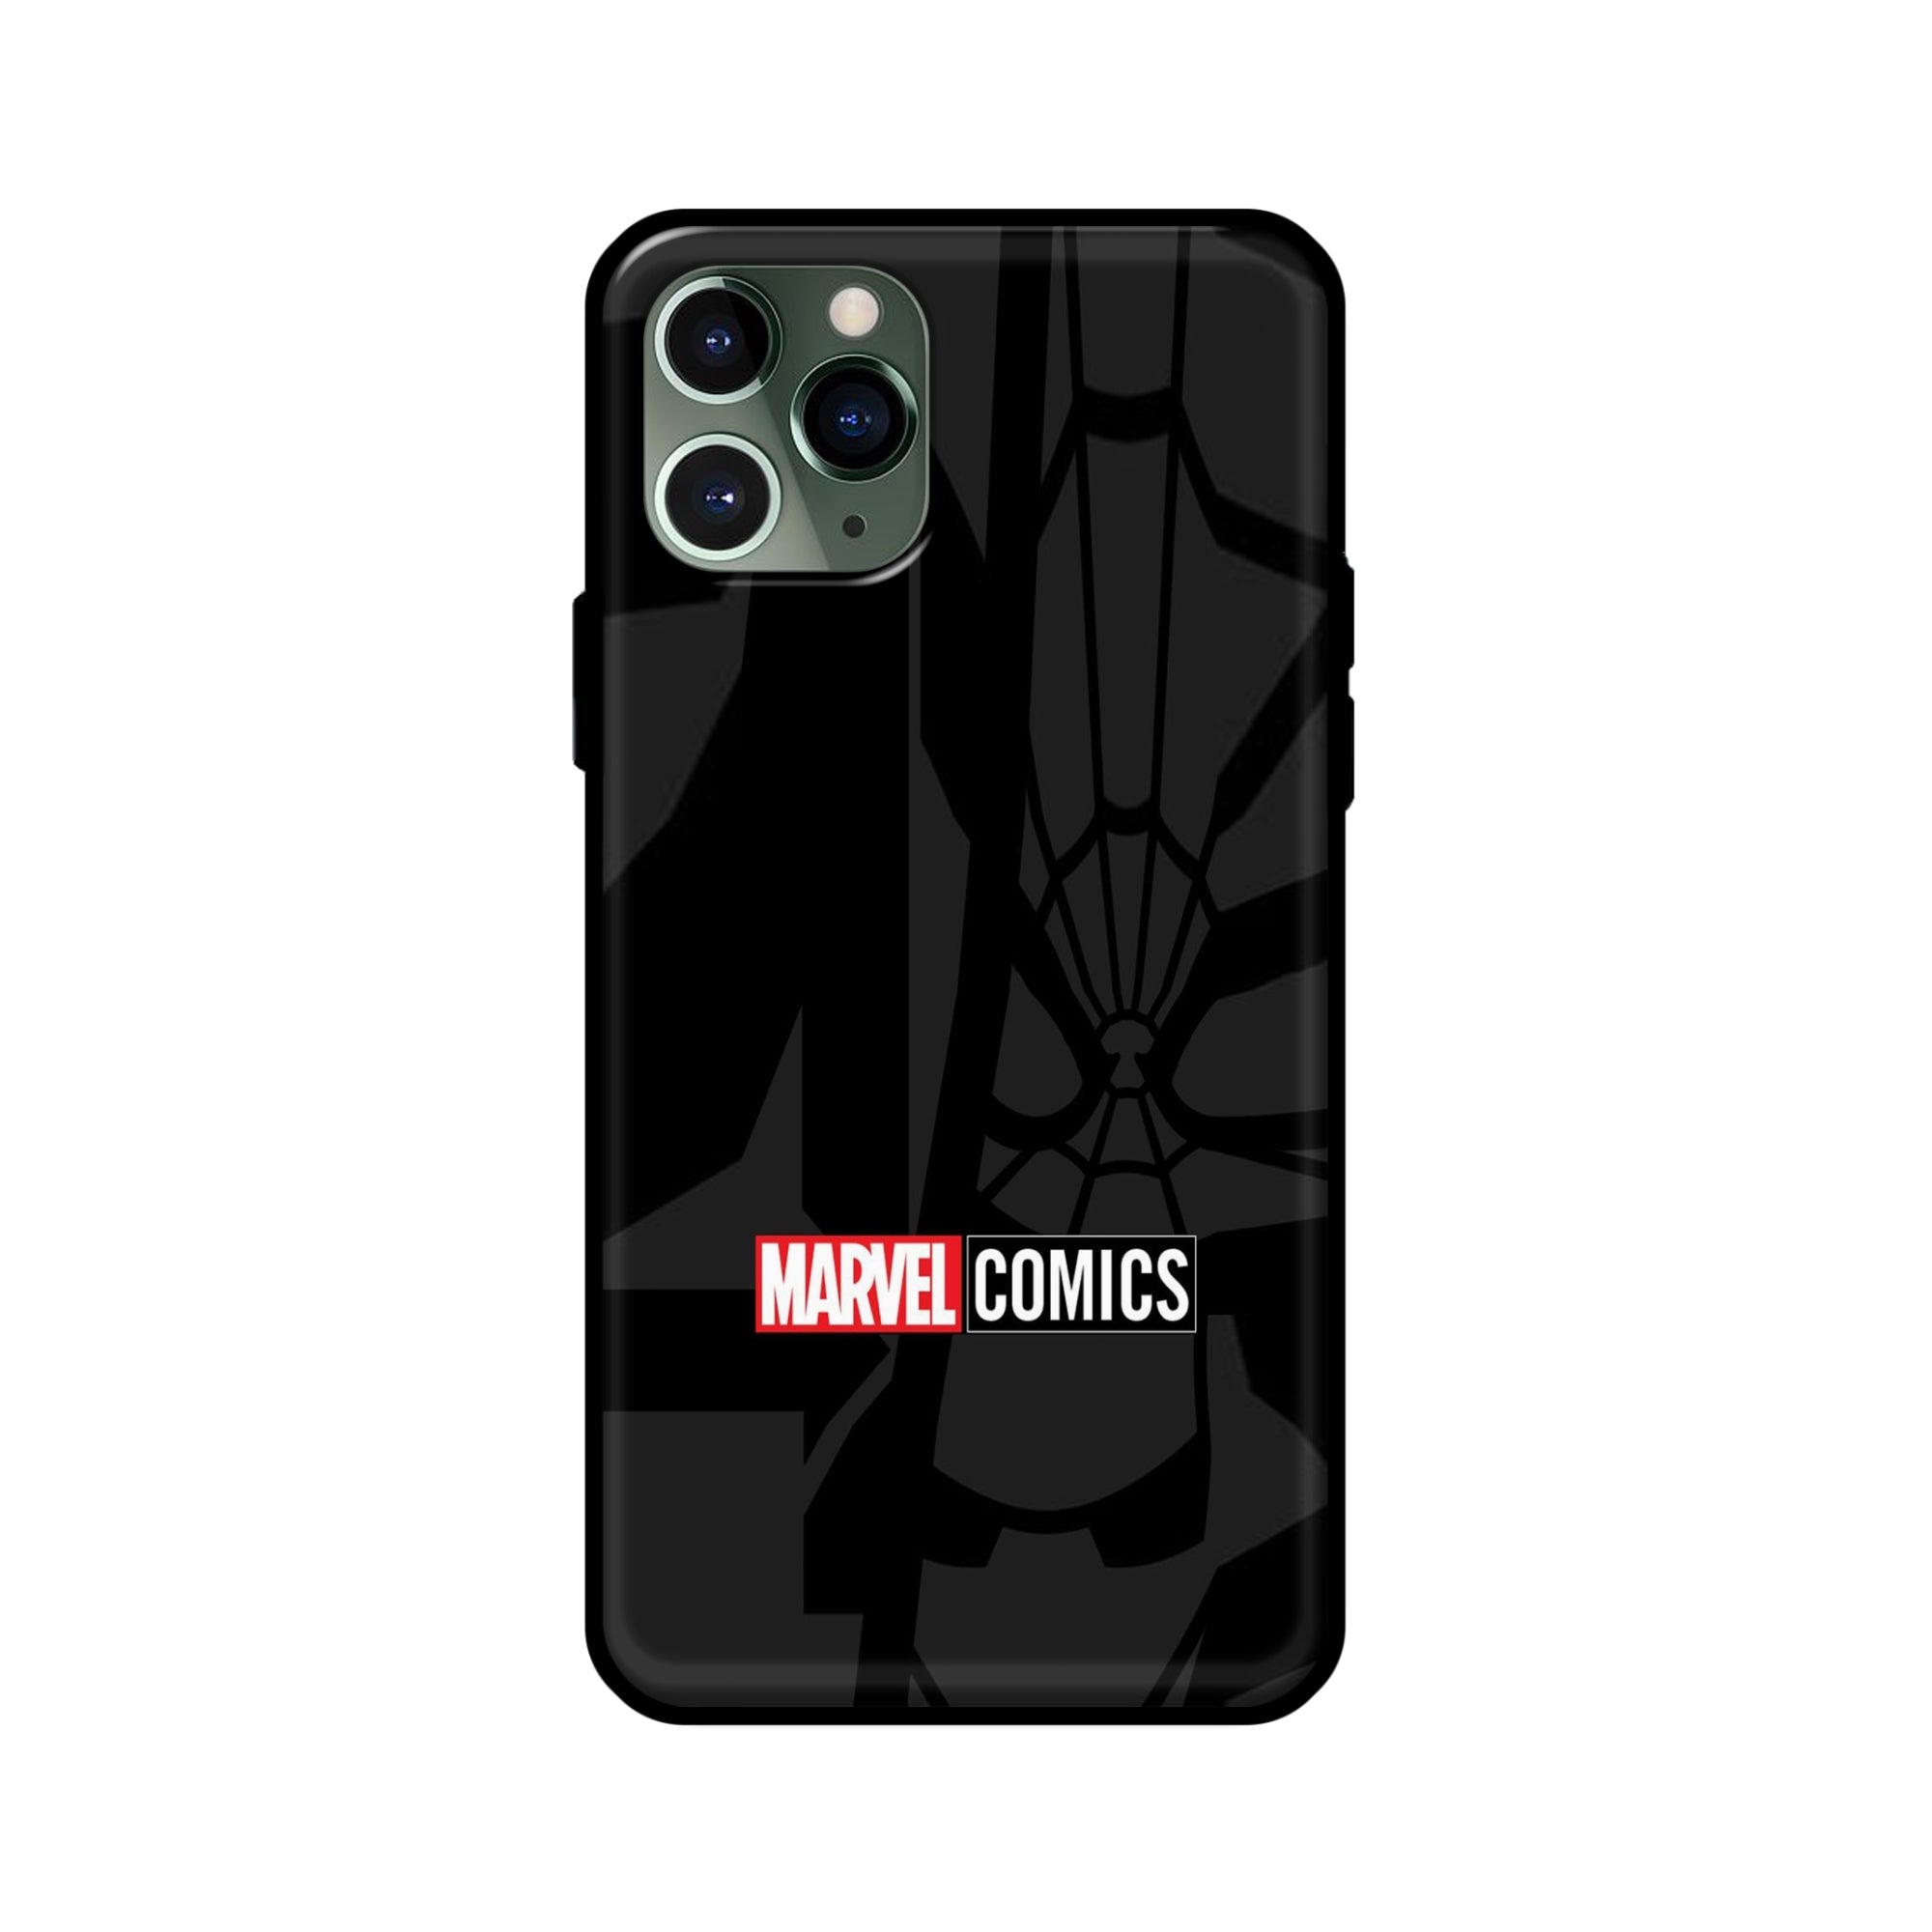 Buy Marvel Comics Glass/Metal Back Mobile Phone Case/Cover For iPhone 11 Pro Online